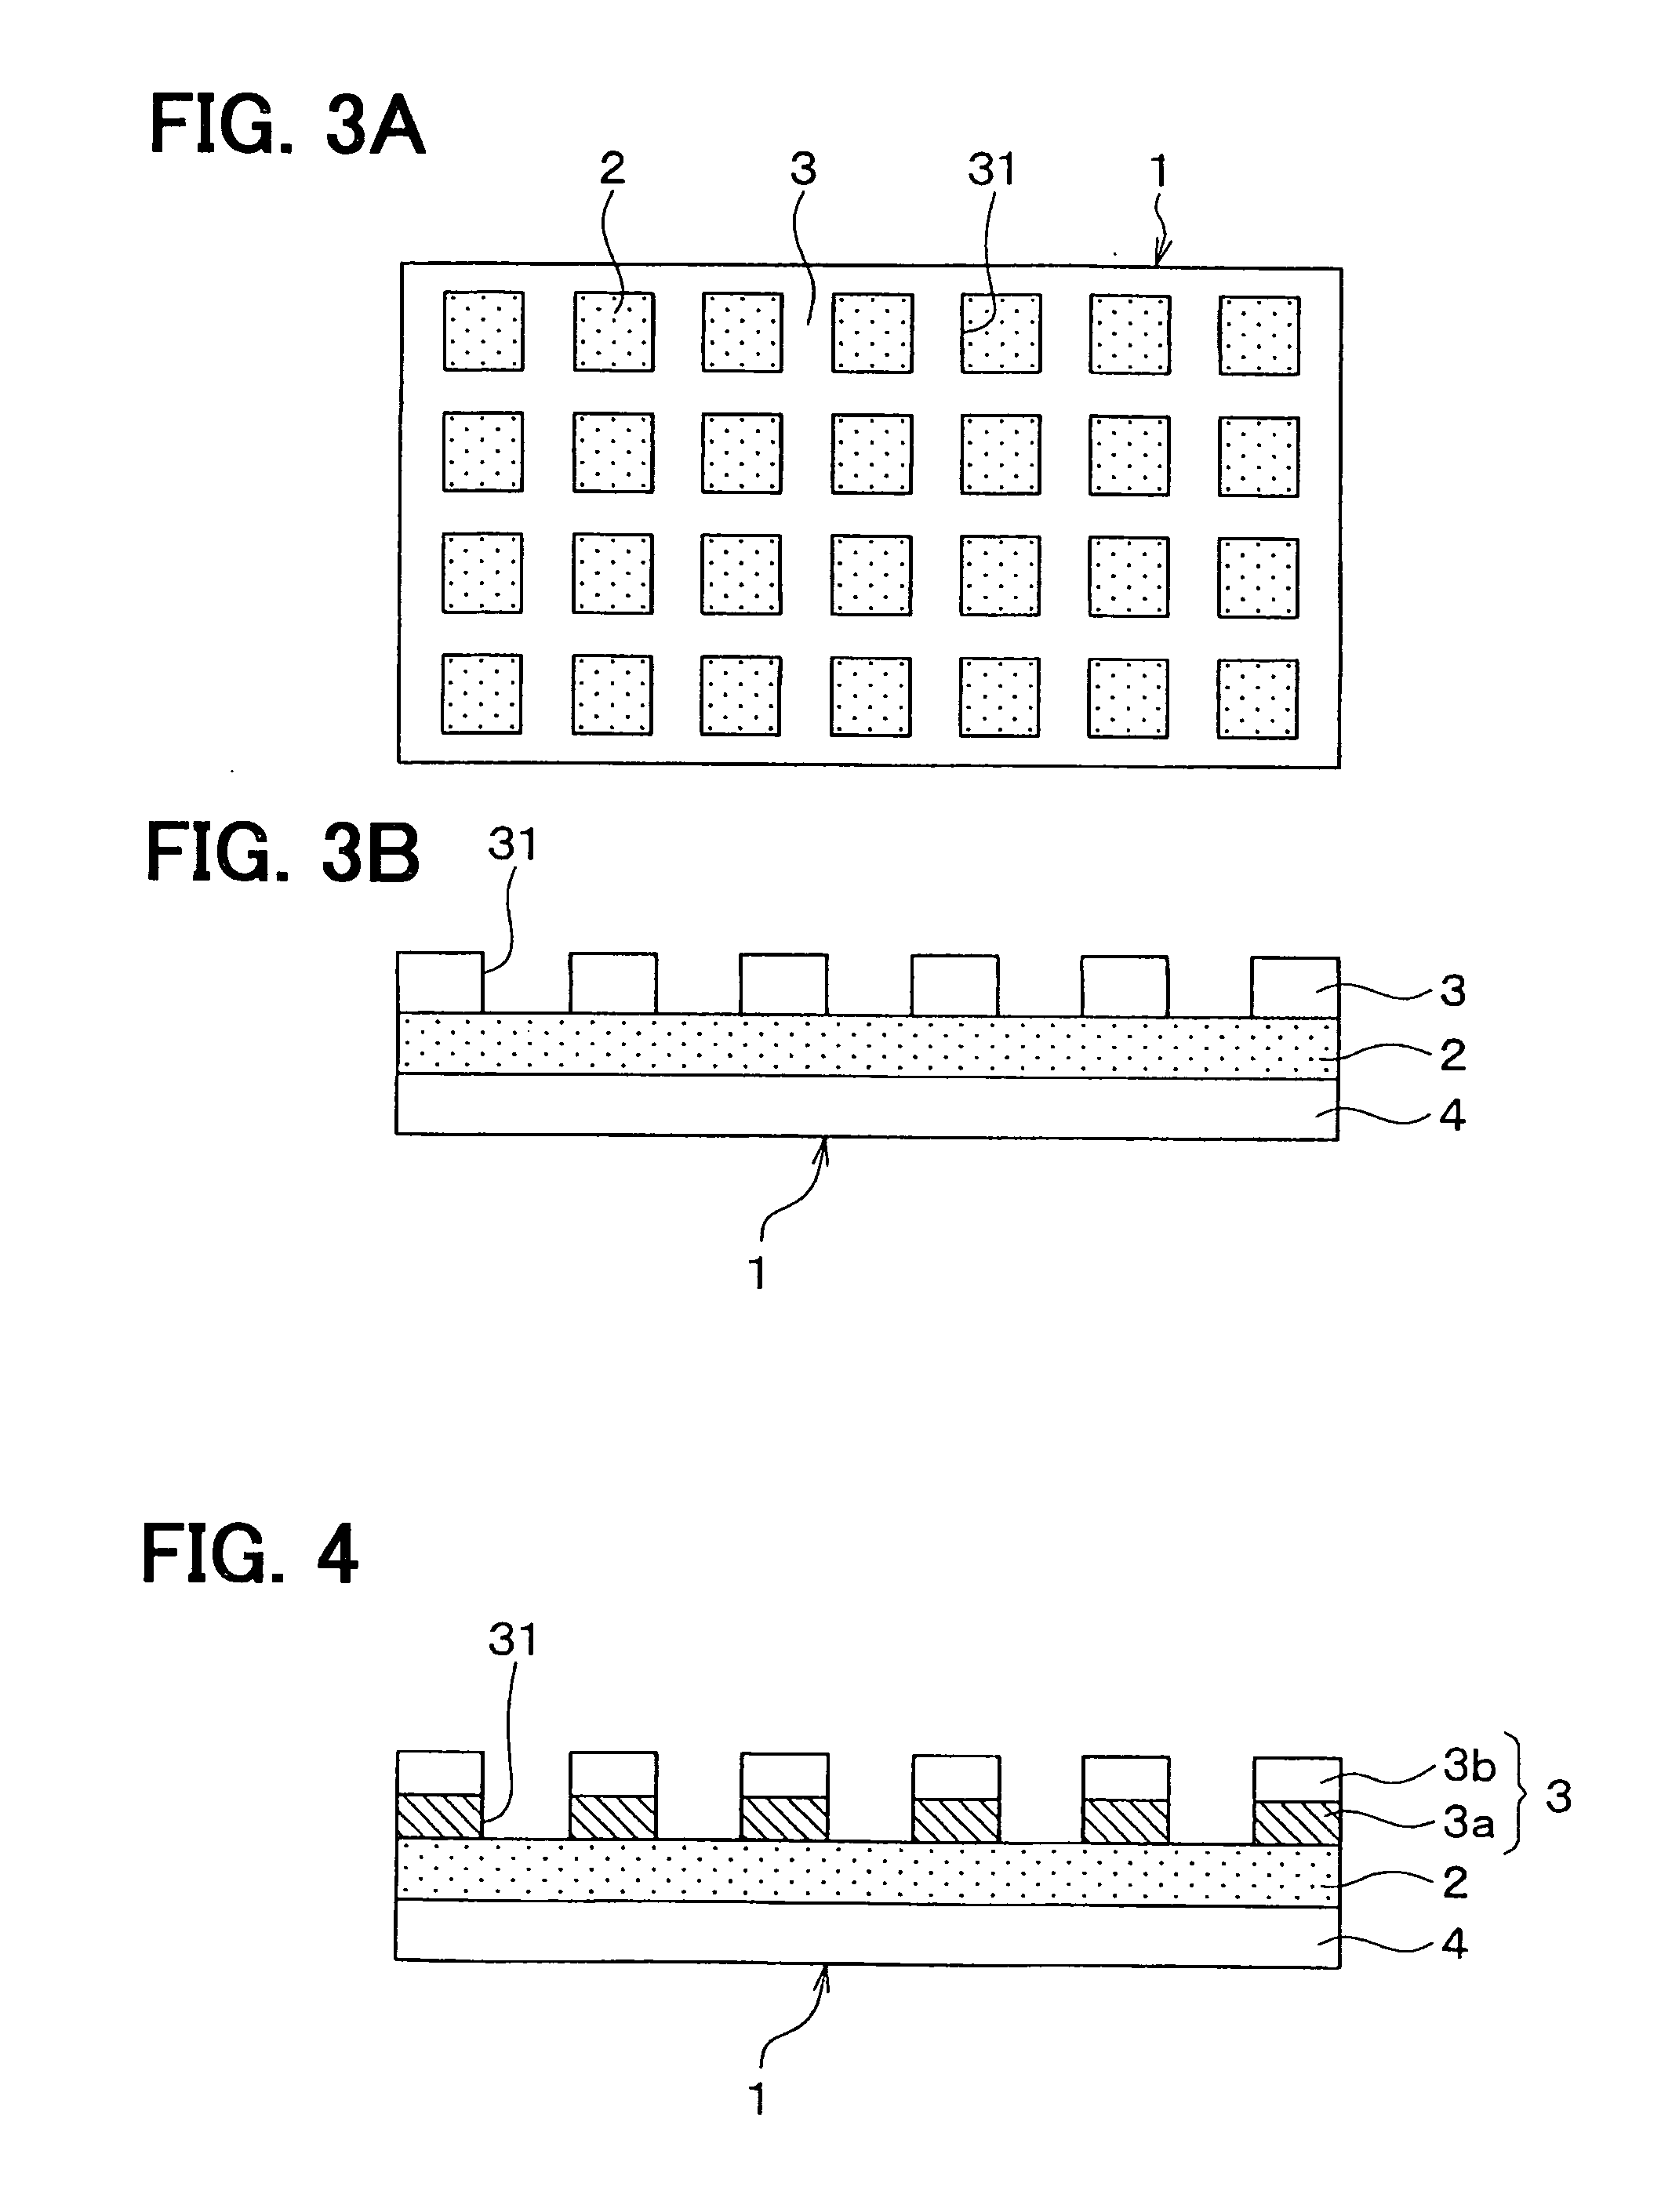 Radiation heating system for vehicle